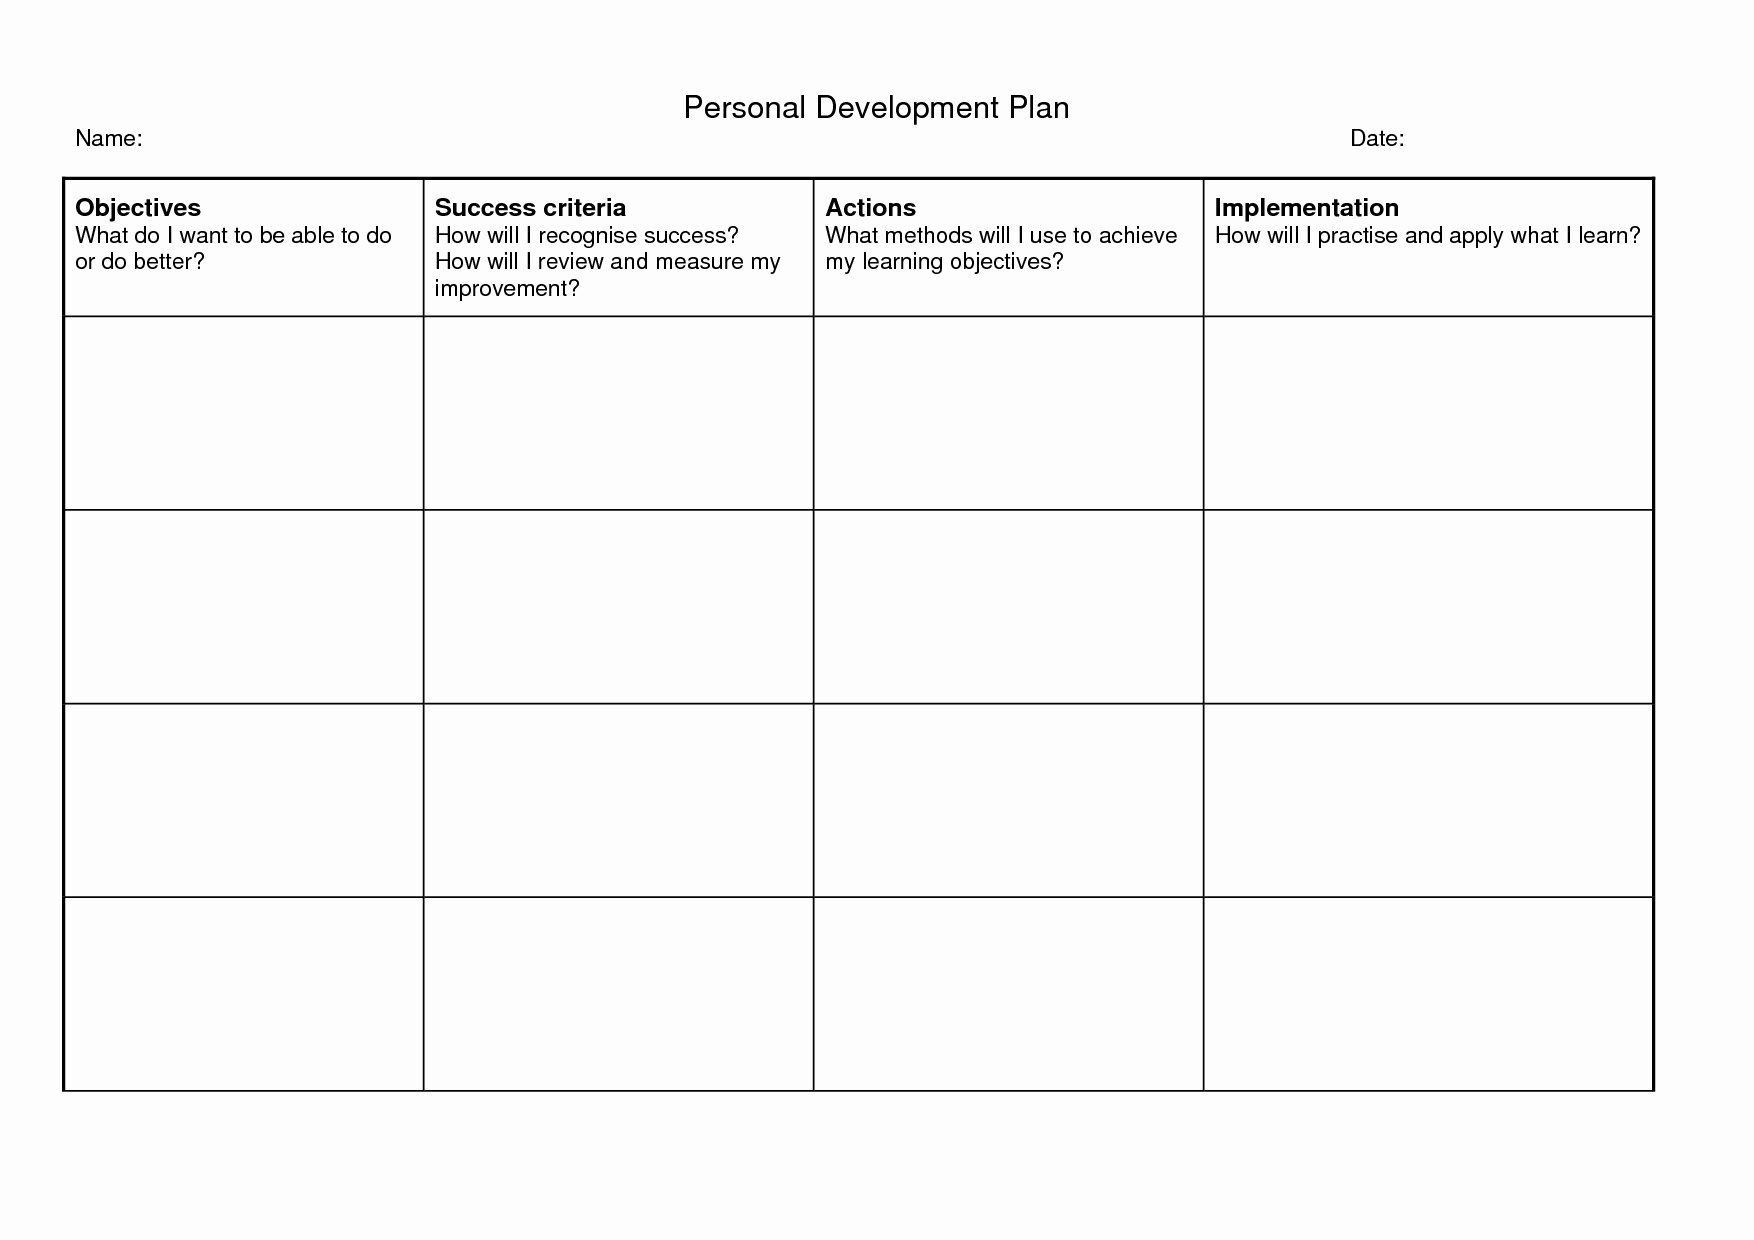 Personal Growth Plan Template New 6 Free Personal Development Plan Templates Excel Pdf formats